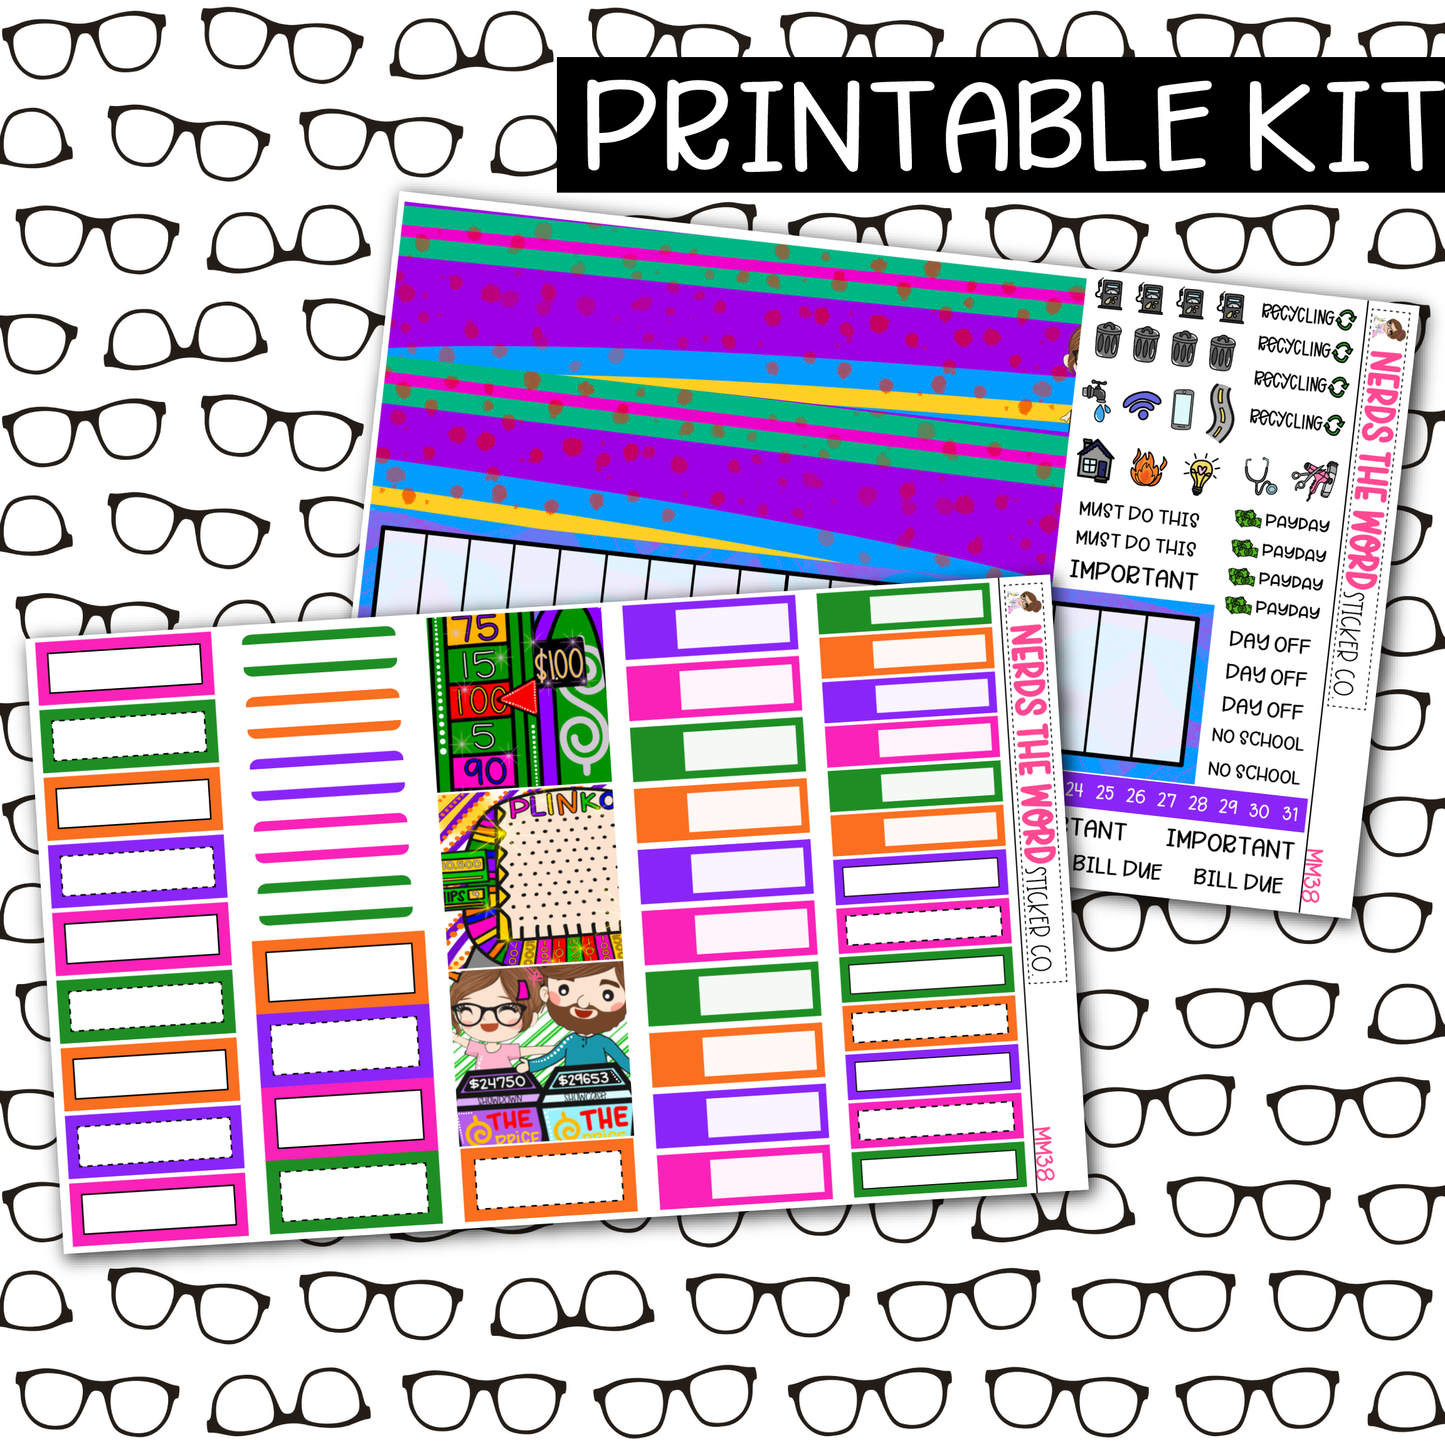 PRINTABLE  One Dollar Monthly Kit - Choose your Size